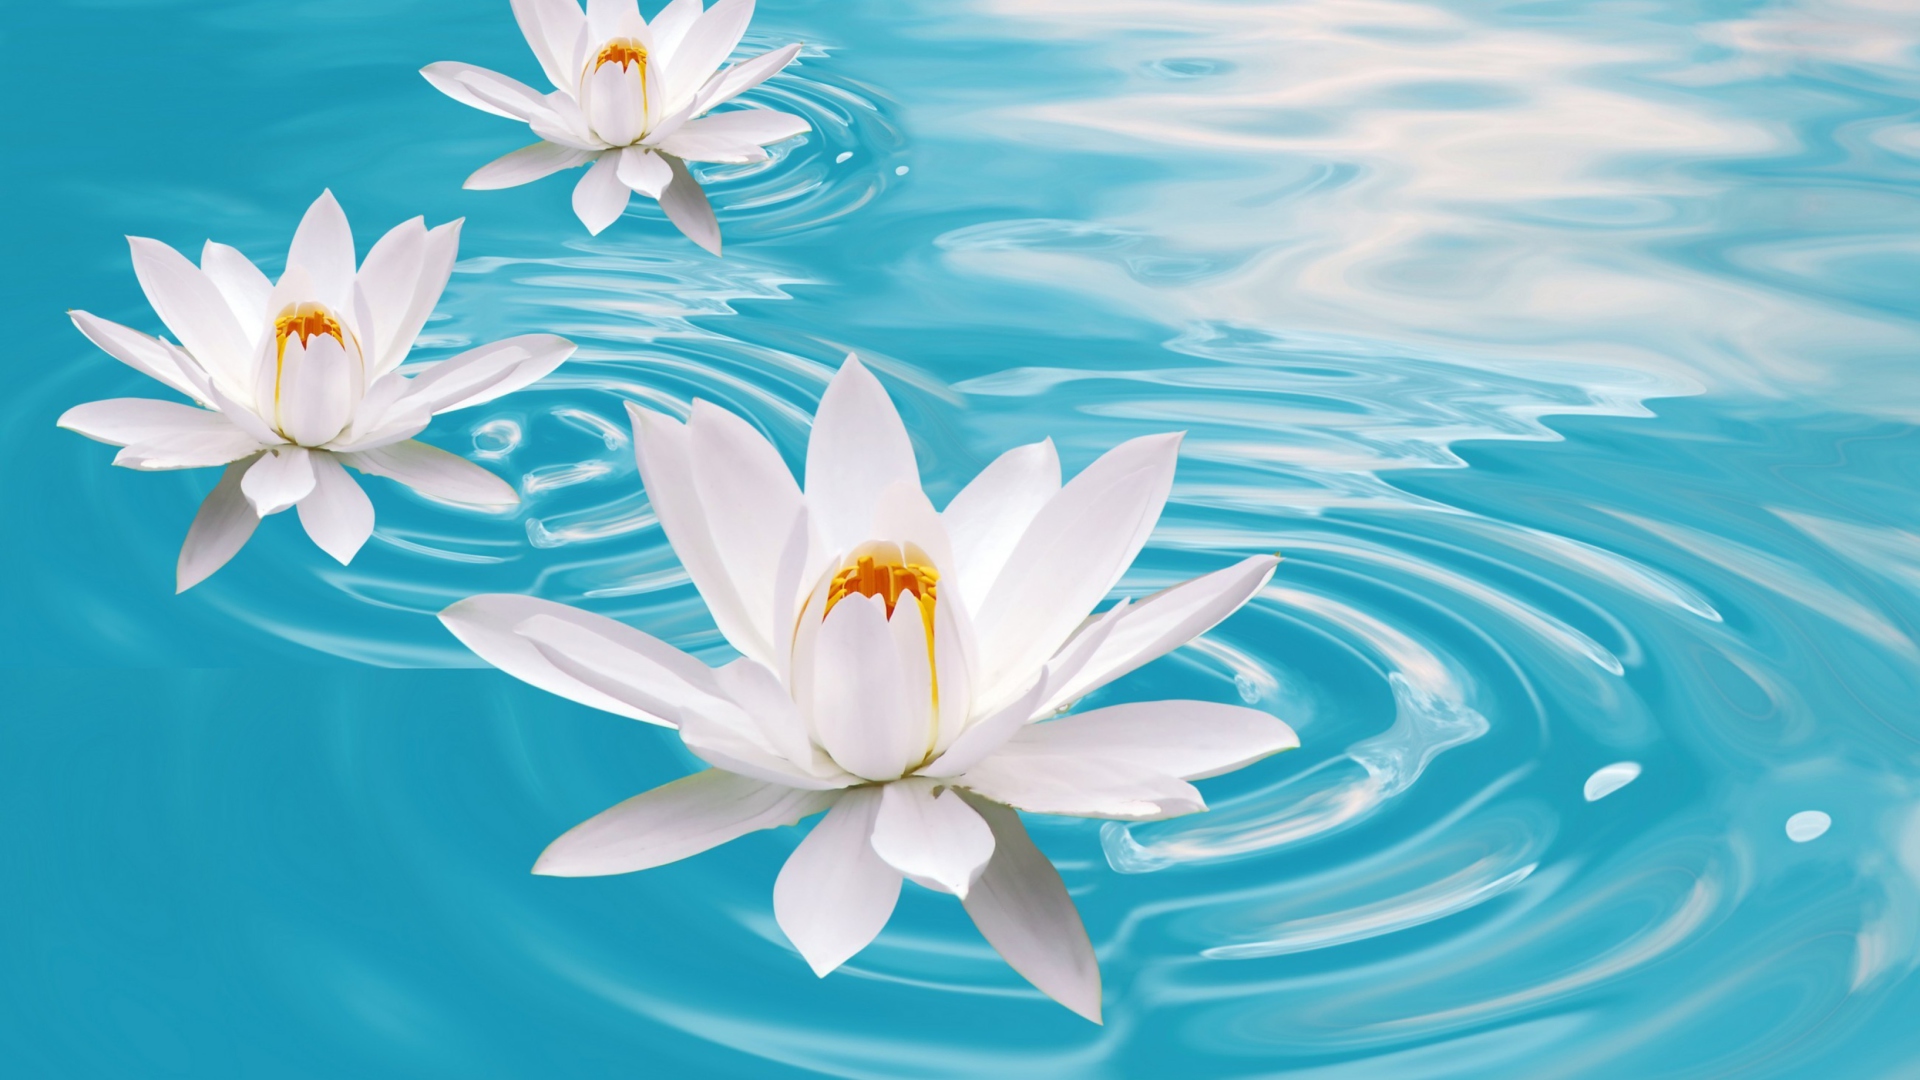 White Lilies And Blue Water wallpaper 1920x1080